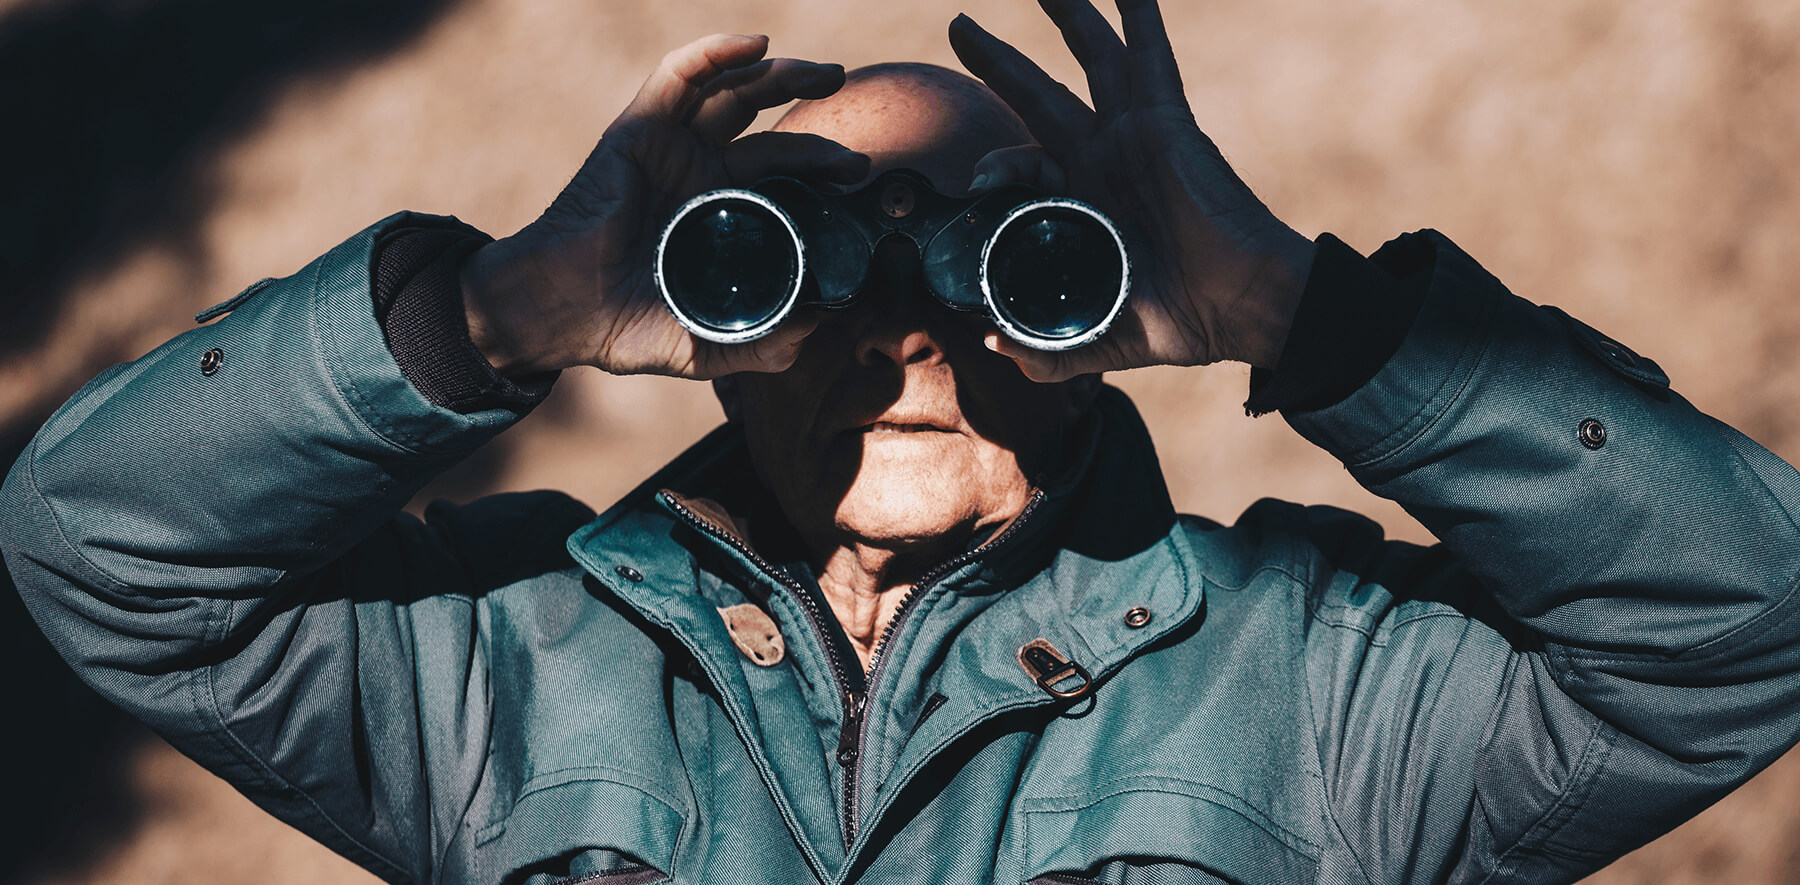 4 Ways to Spy on Competition to Grow Your Business